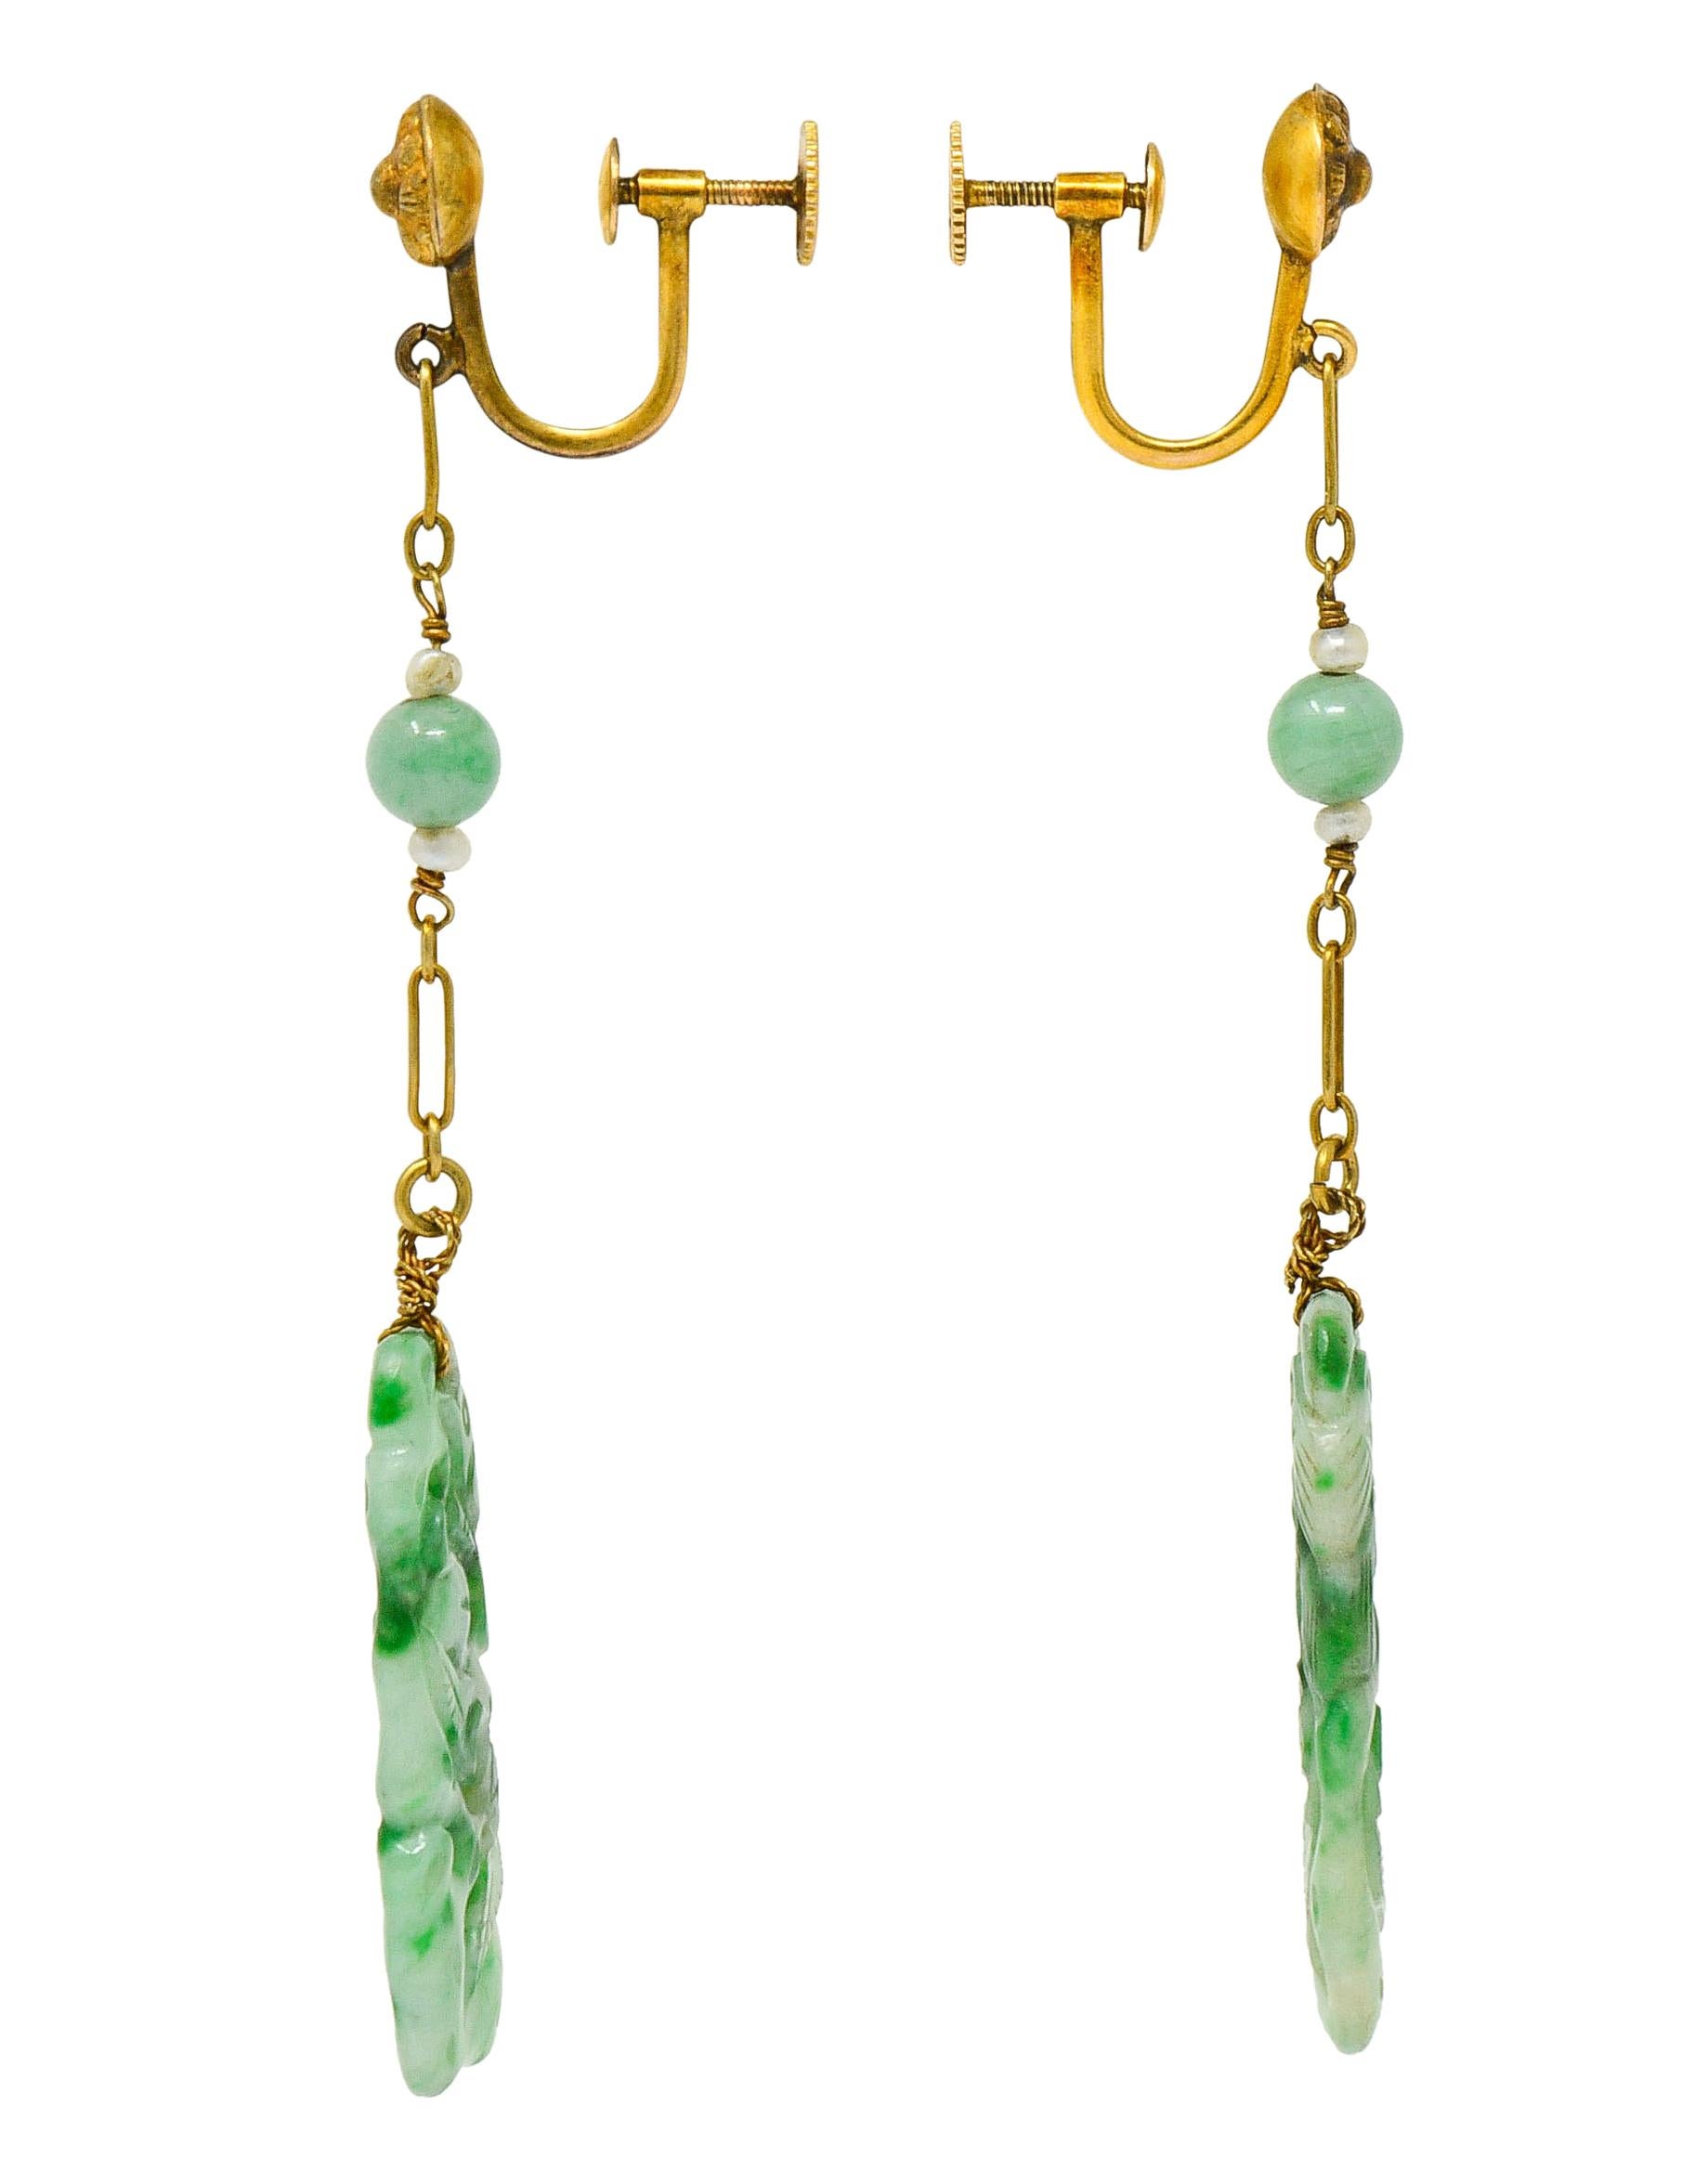 Screwbacks are designed with floral repoussè surmounts

Suspending elongated gold links and 4.9 mm round jade beads accented by 2.0 mm natural freshwater pearls

Terminating as an ornately carved rectangular tablet of jade

Strongly mottled dark